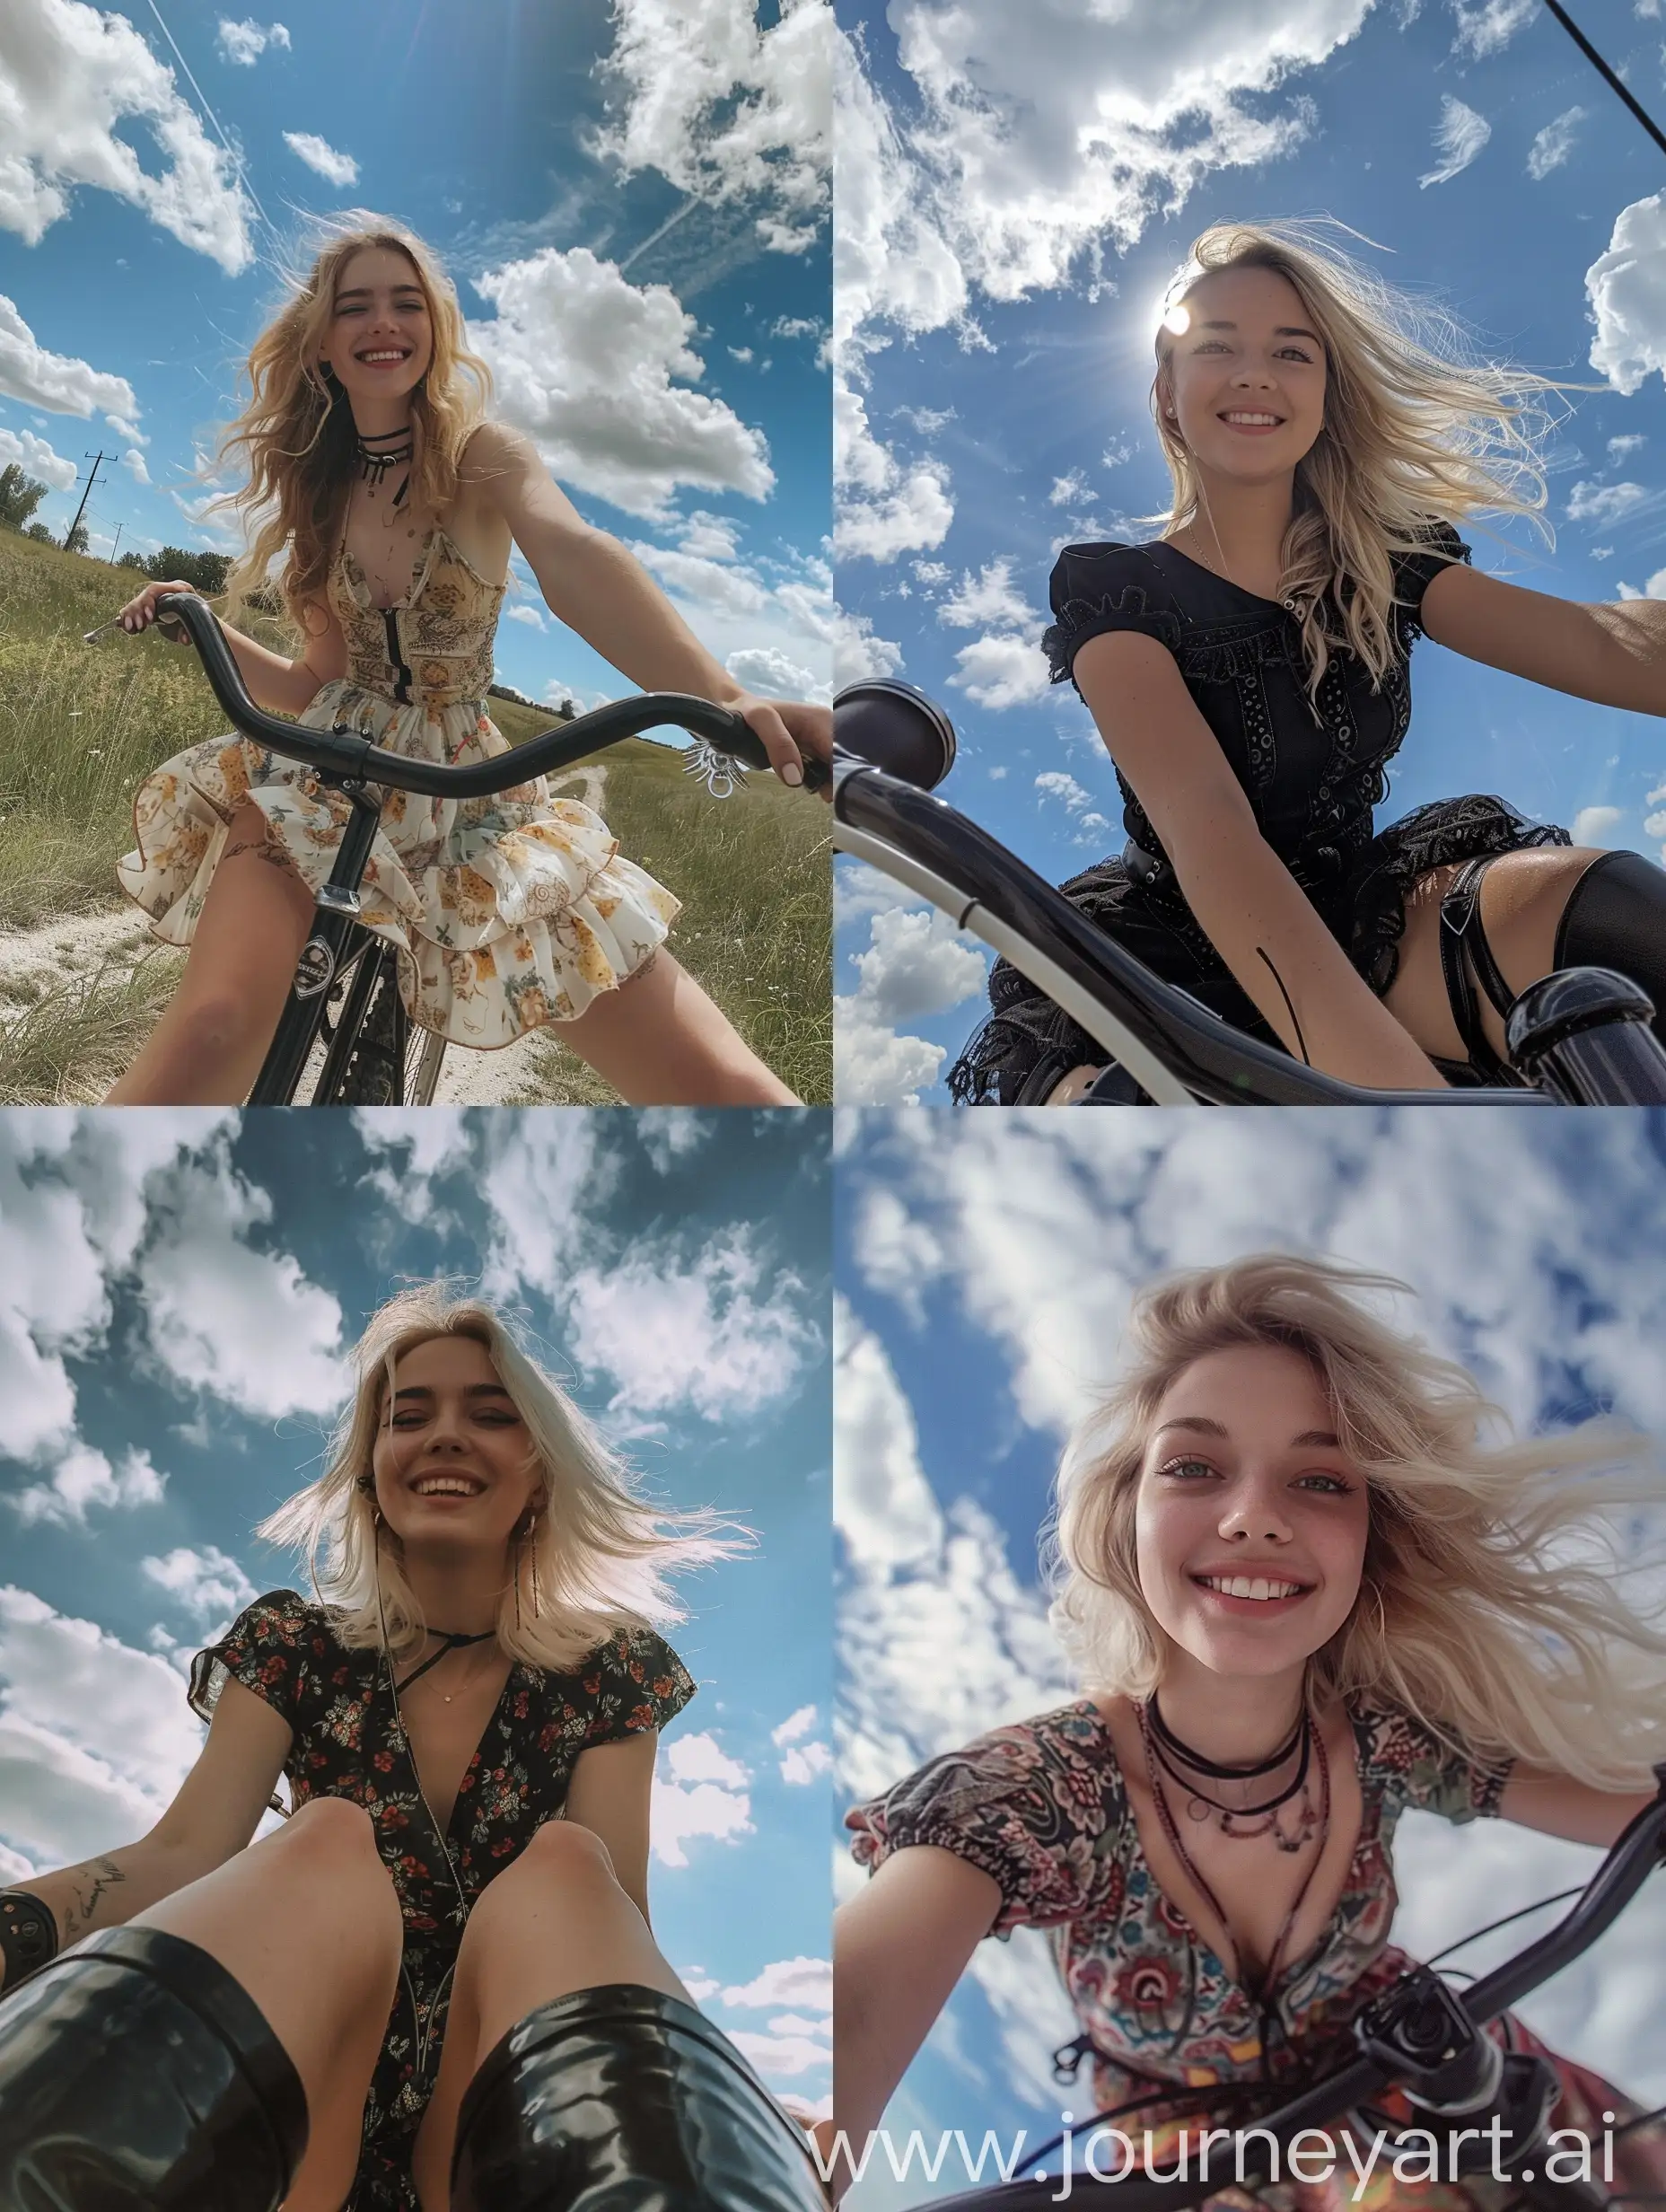 Young-Woman-with-Blonde-Hair-Smiling-on-Bicycle-in-Natural-Setting